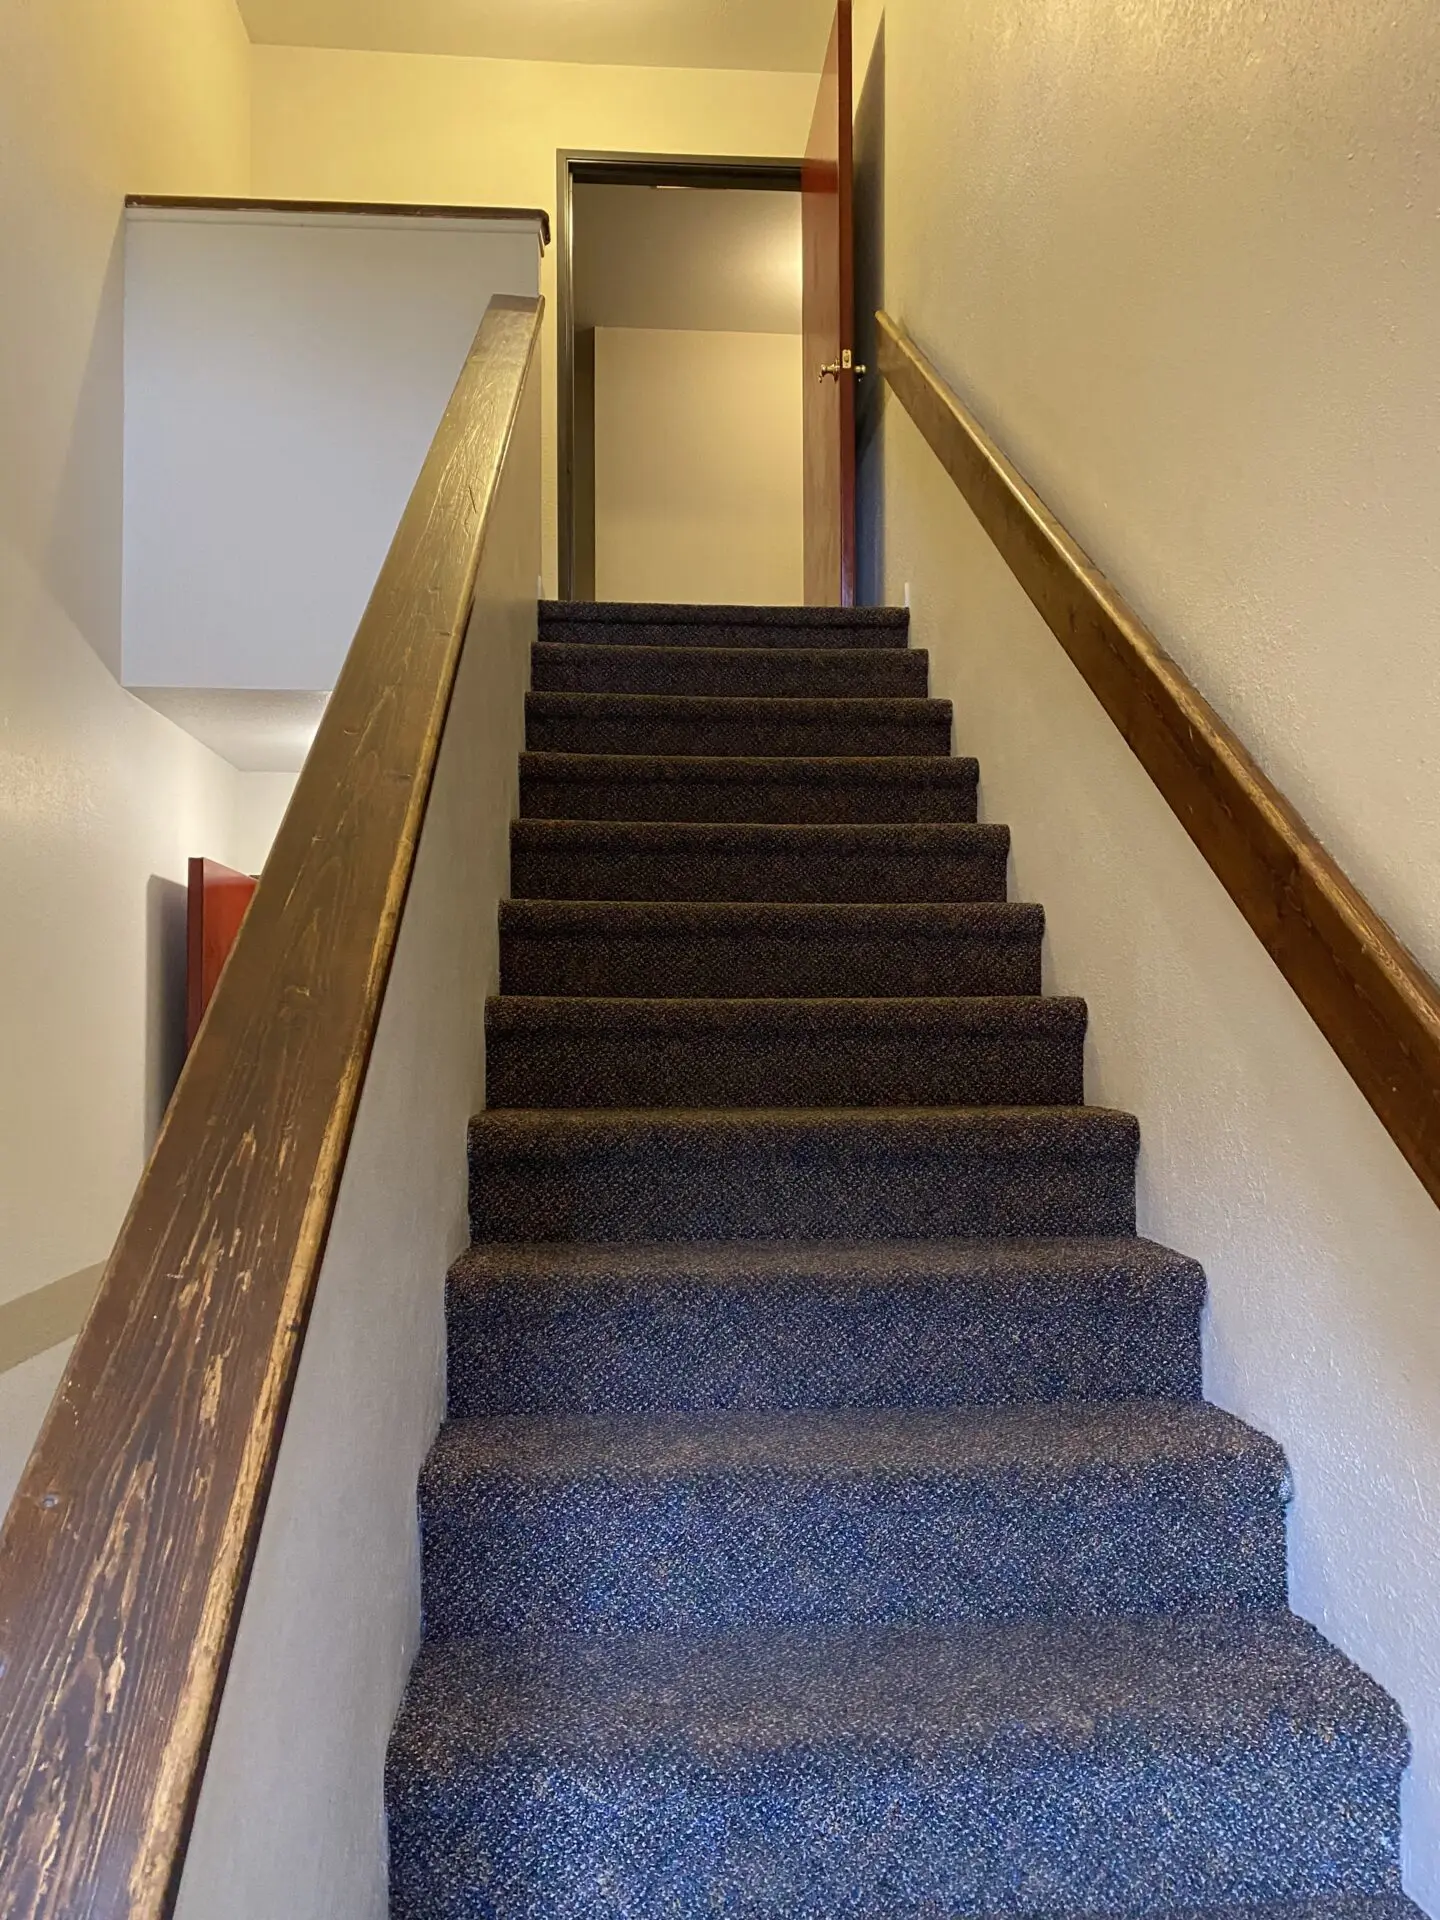 Ridgeview apartments interior and stairs and railings